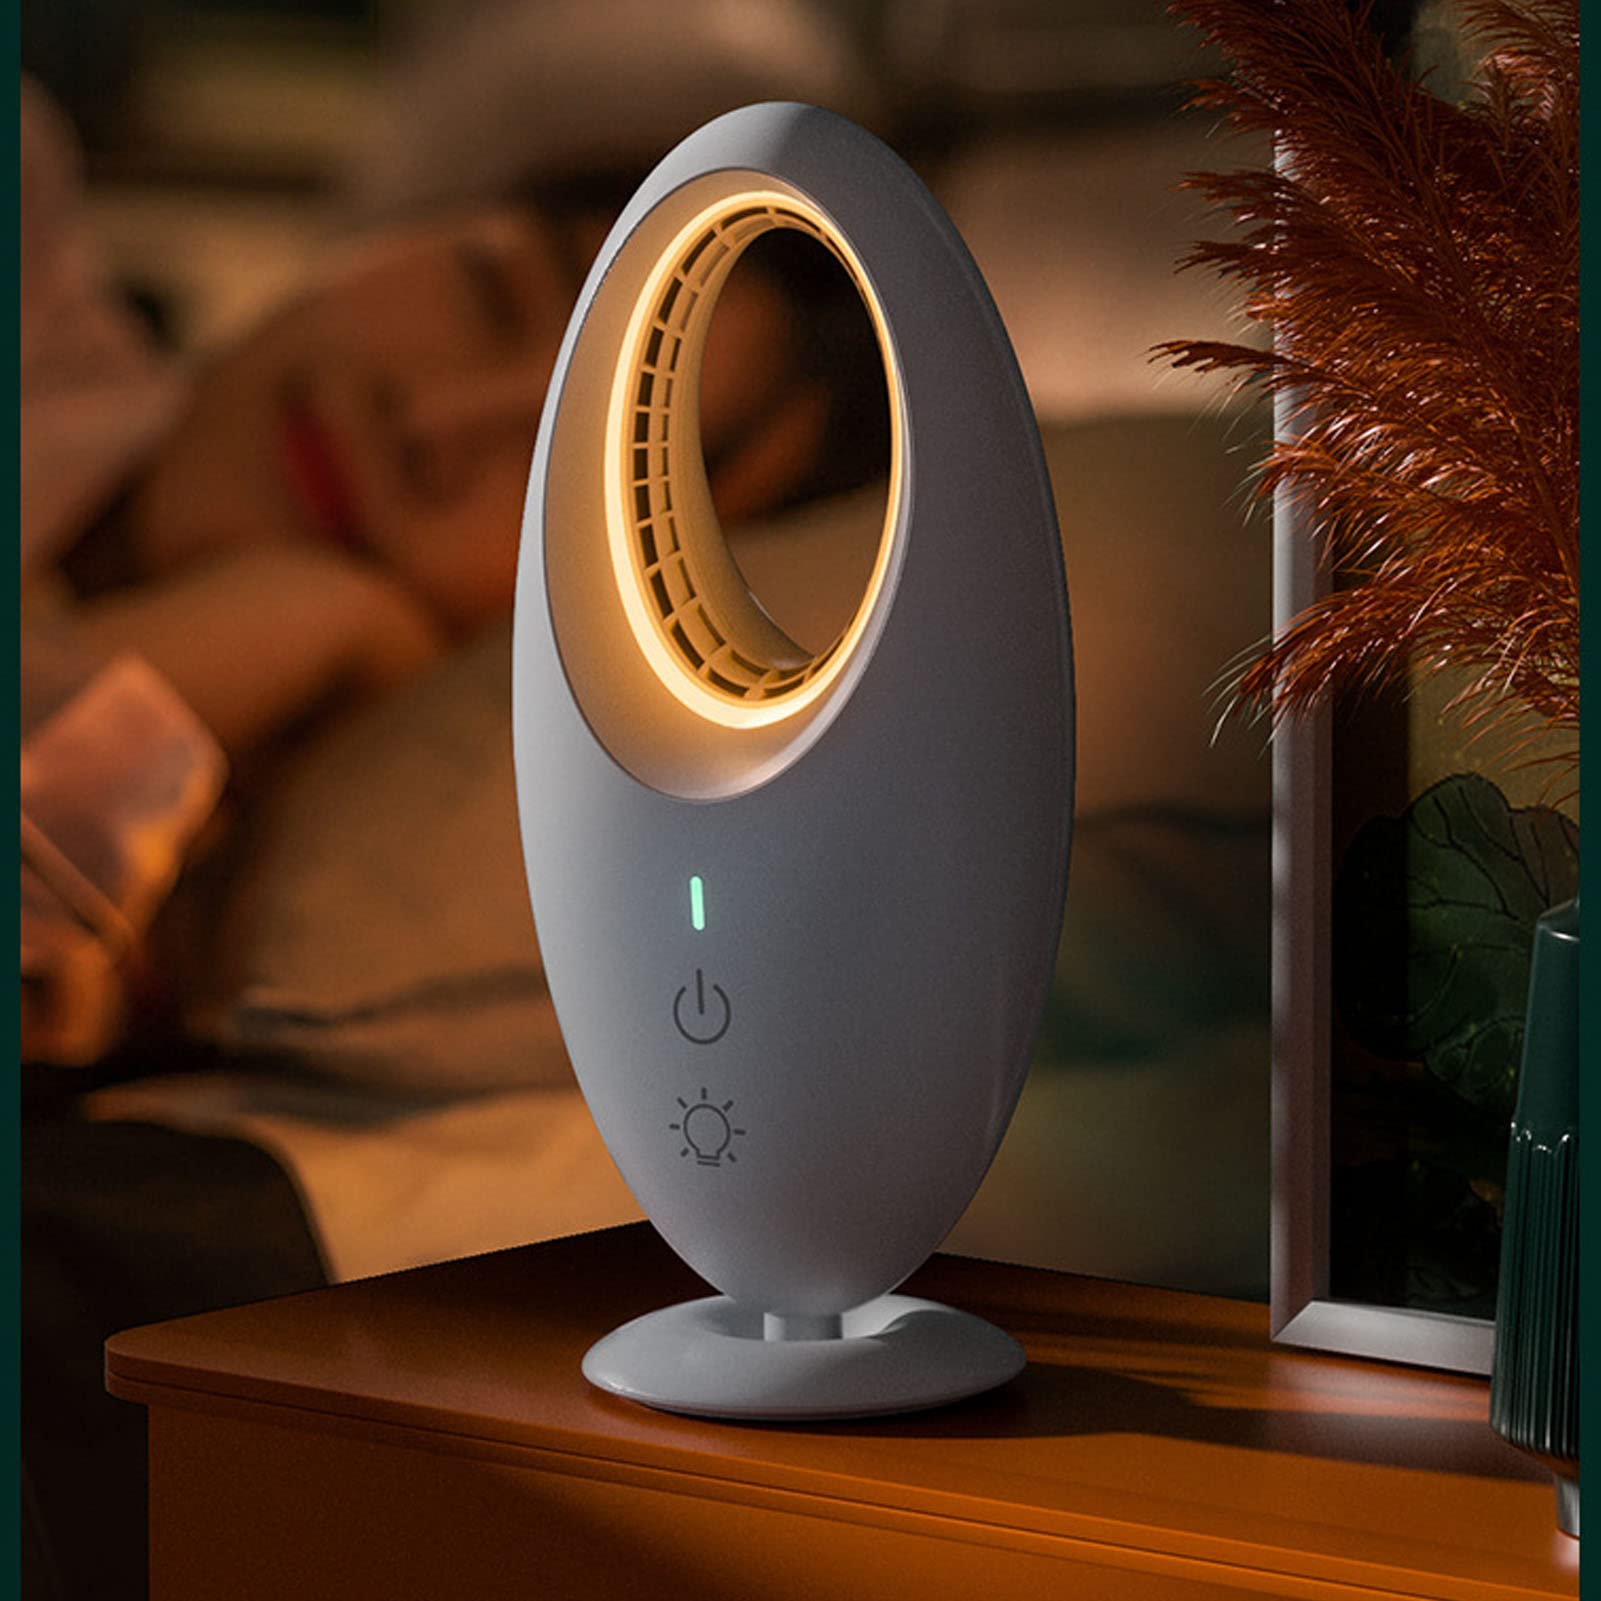 Desk Bladeless Fan - Small Table Fan with Touch Control & LED Light - Small Quiet Cooling Fan - USB Rechargeable Oscillating Fan - Personal Portable Fan for Office Home Bedroom